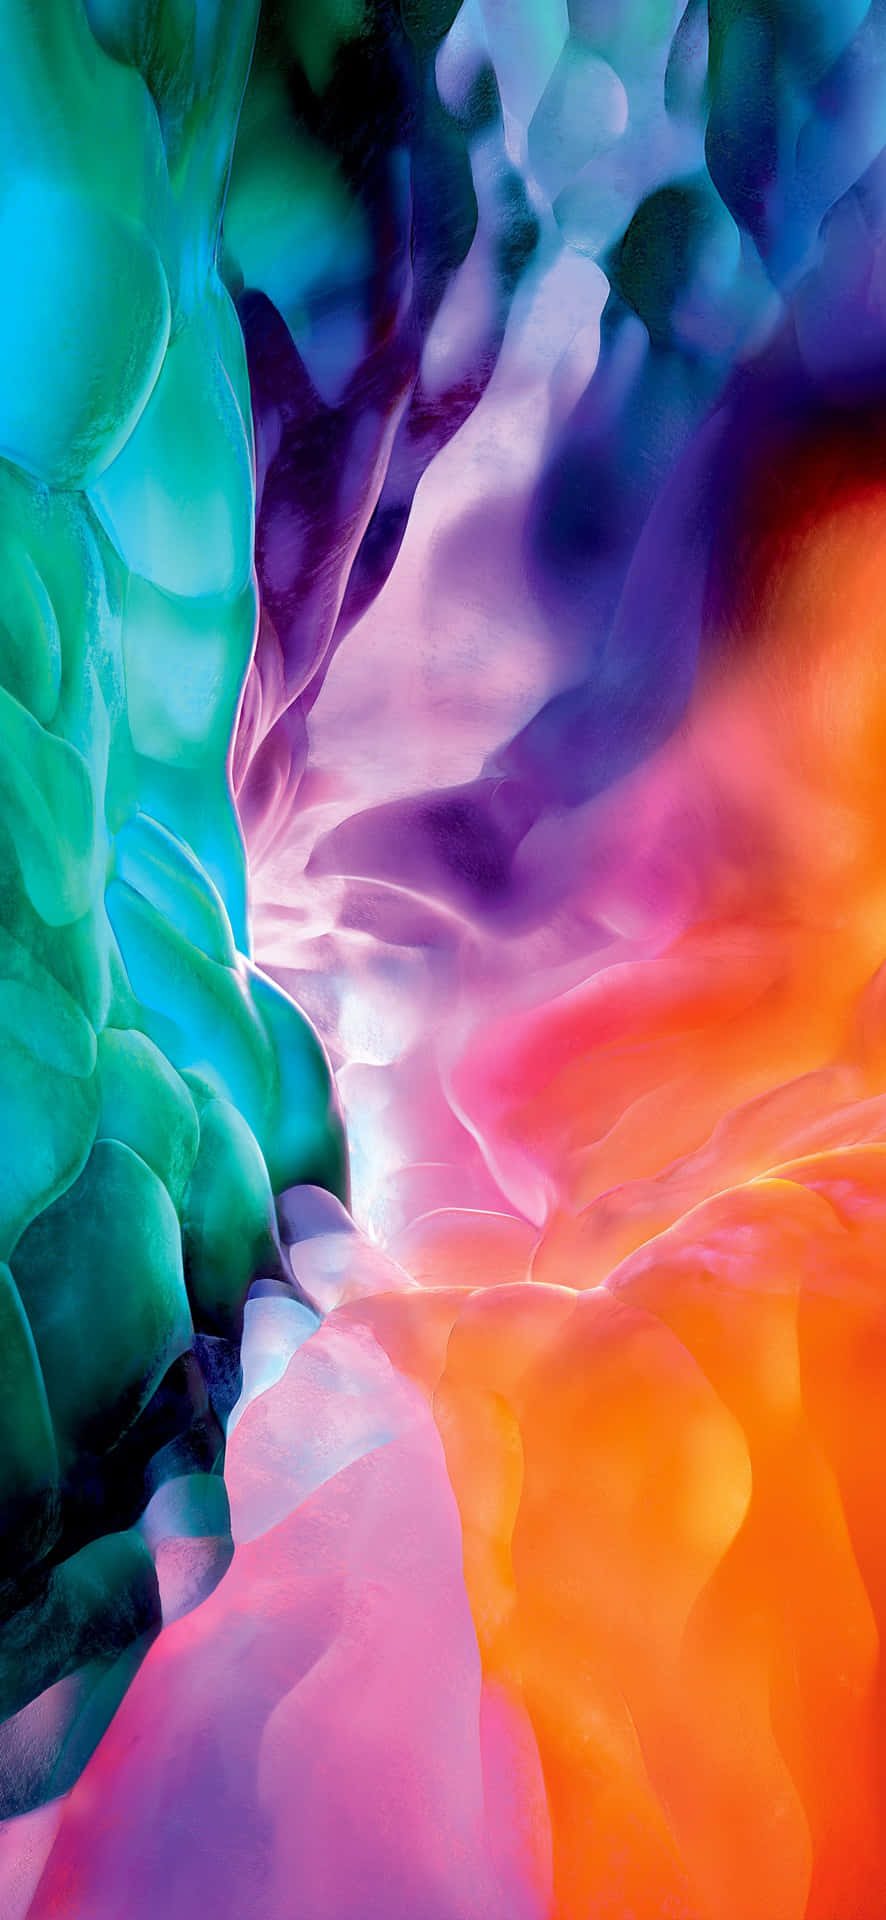 A Colorful Abstract Painting Of A Waterfall Wallpaper